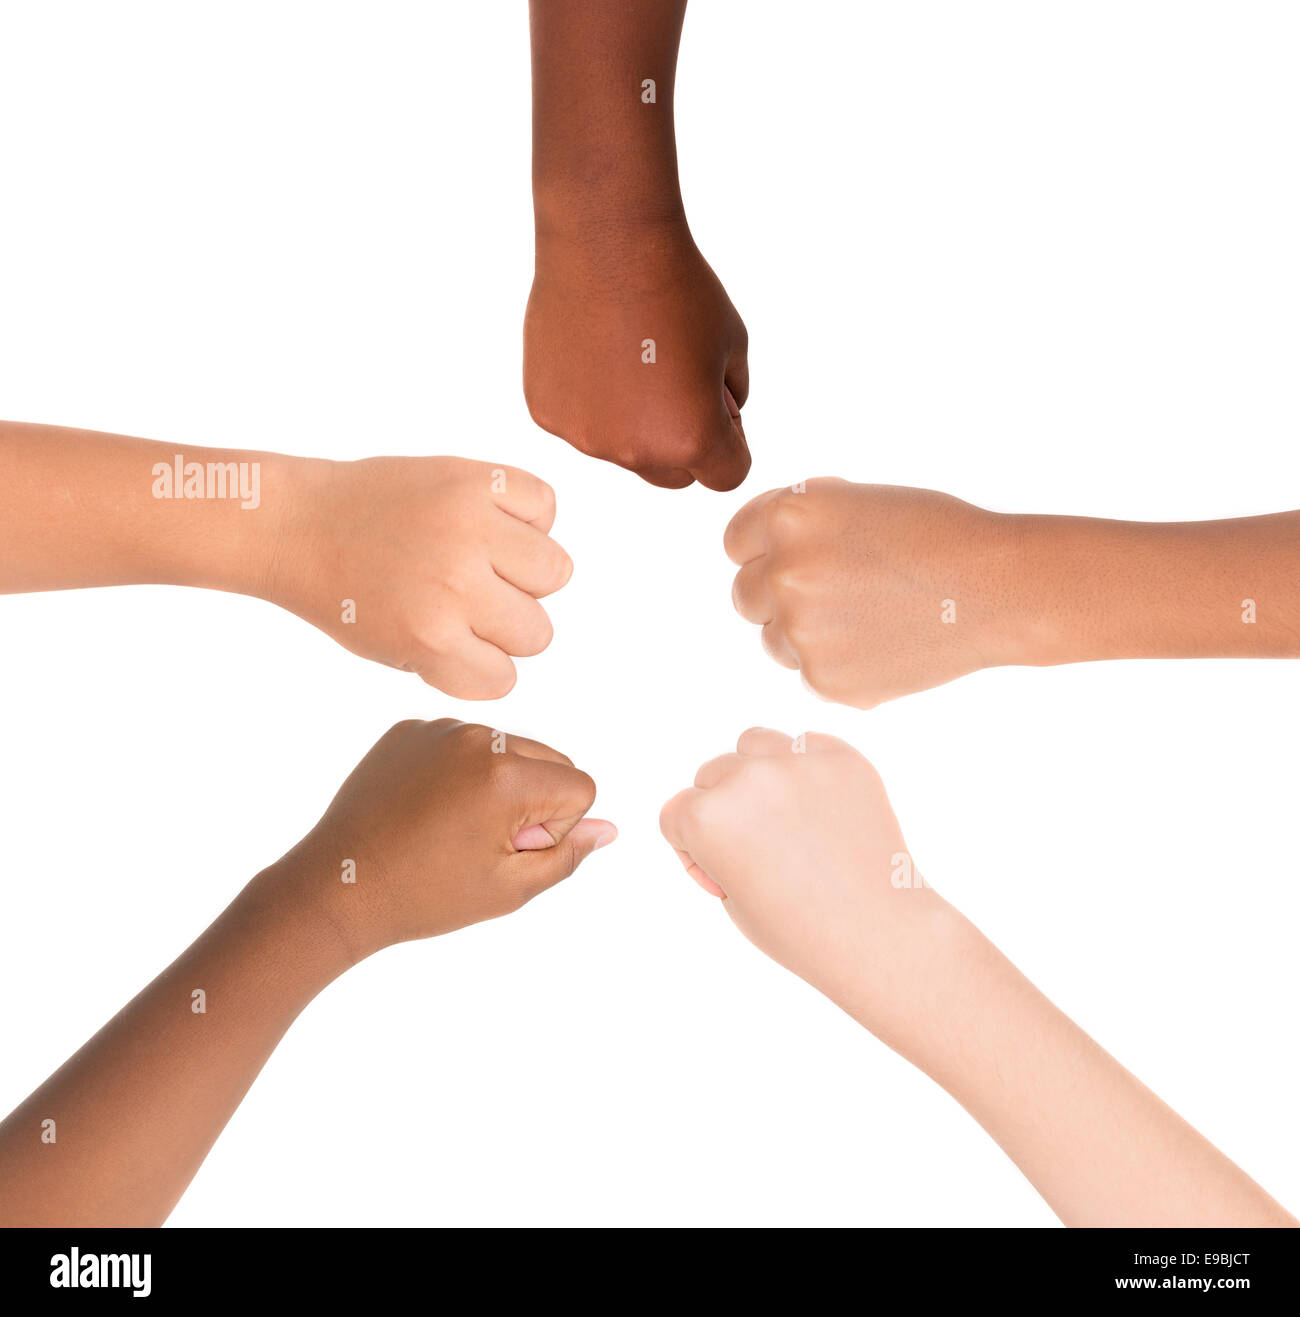 Children's hands from different colors and races together isolated in white Stock Photo